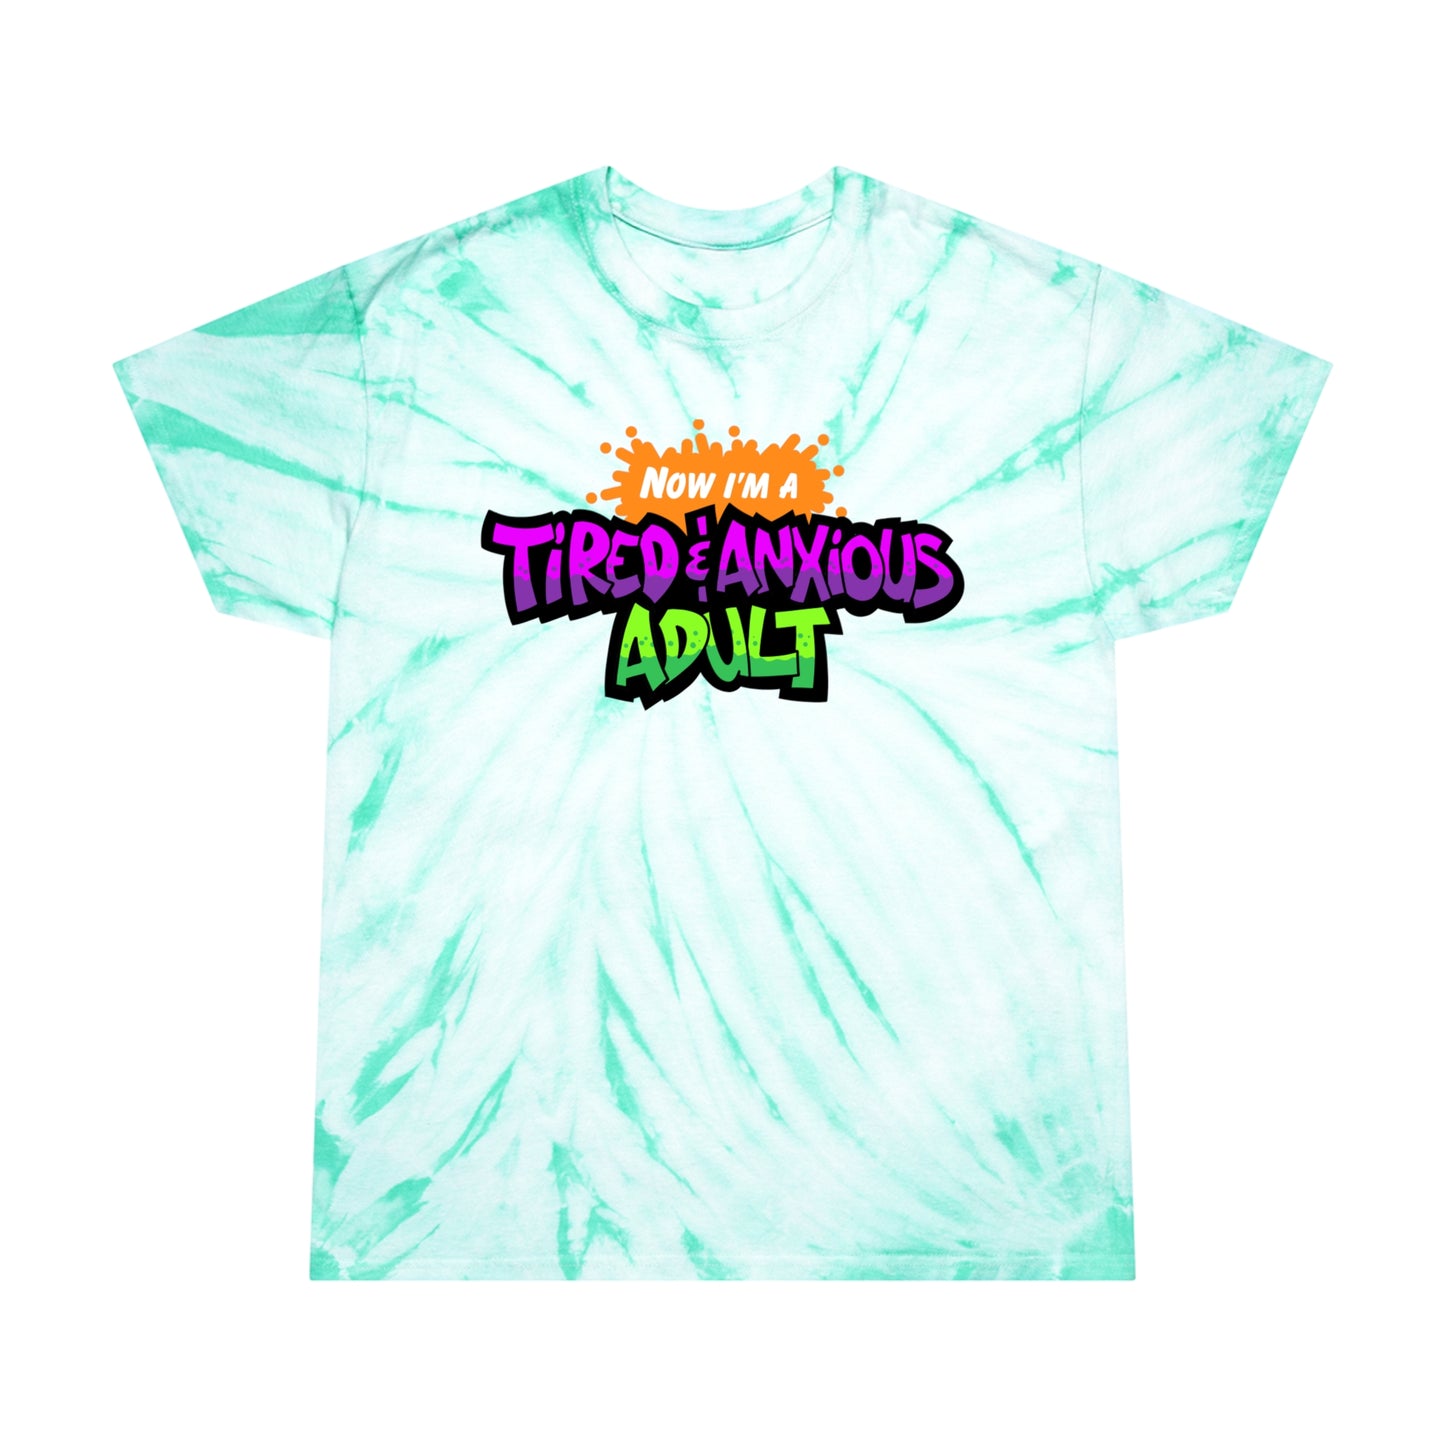 Tired & Anxious Adult FULL COLOR tie-dye t-shirt